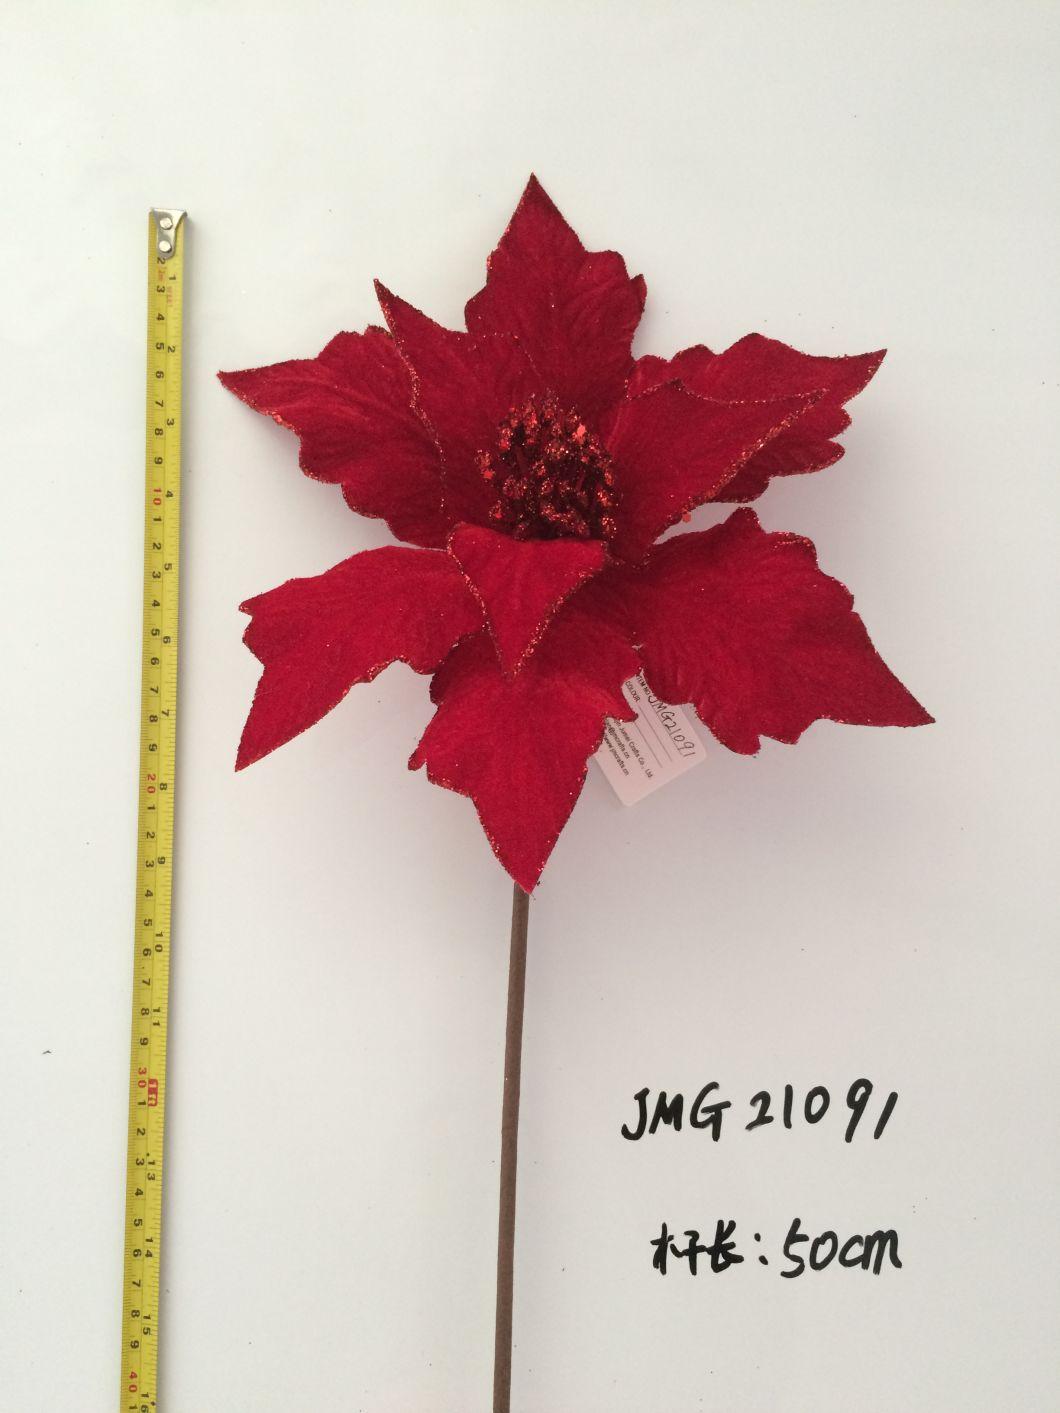 Ytcf090 Red Petals Clasic Type Christmas Flowers Poinsettia Floral